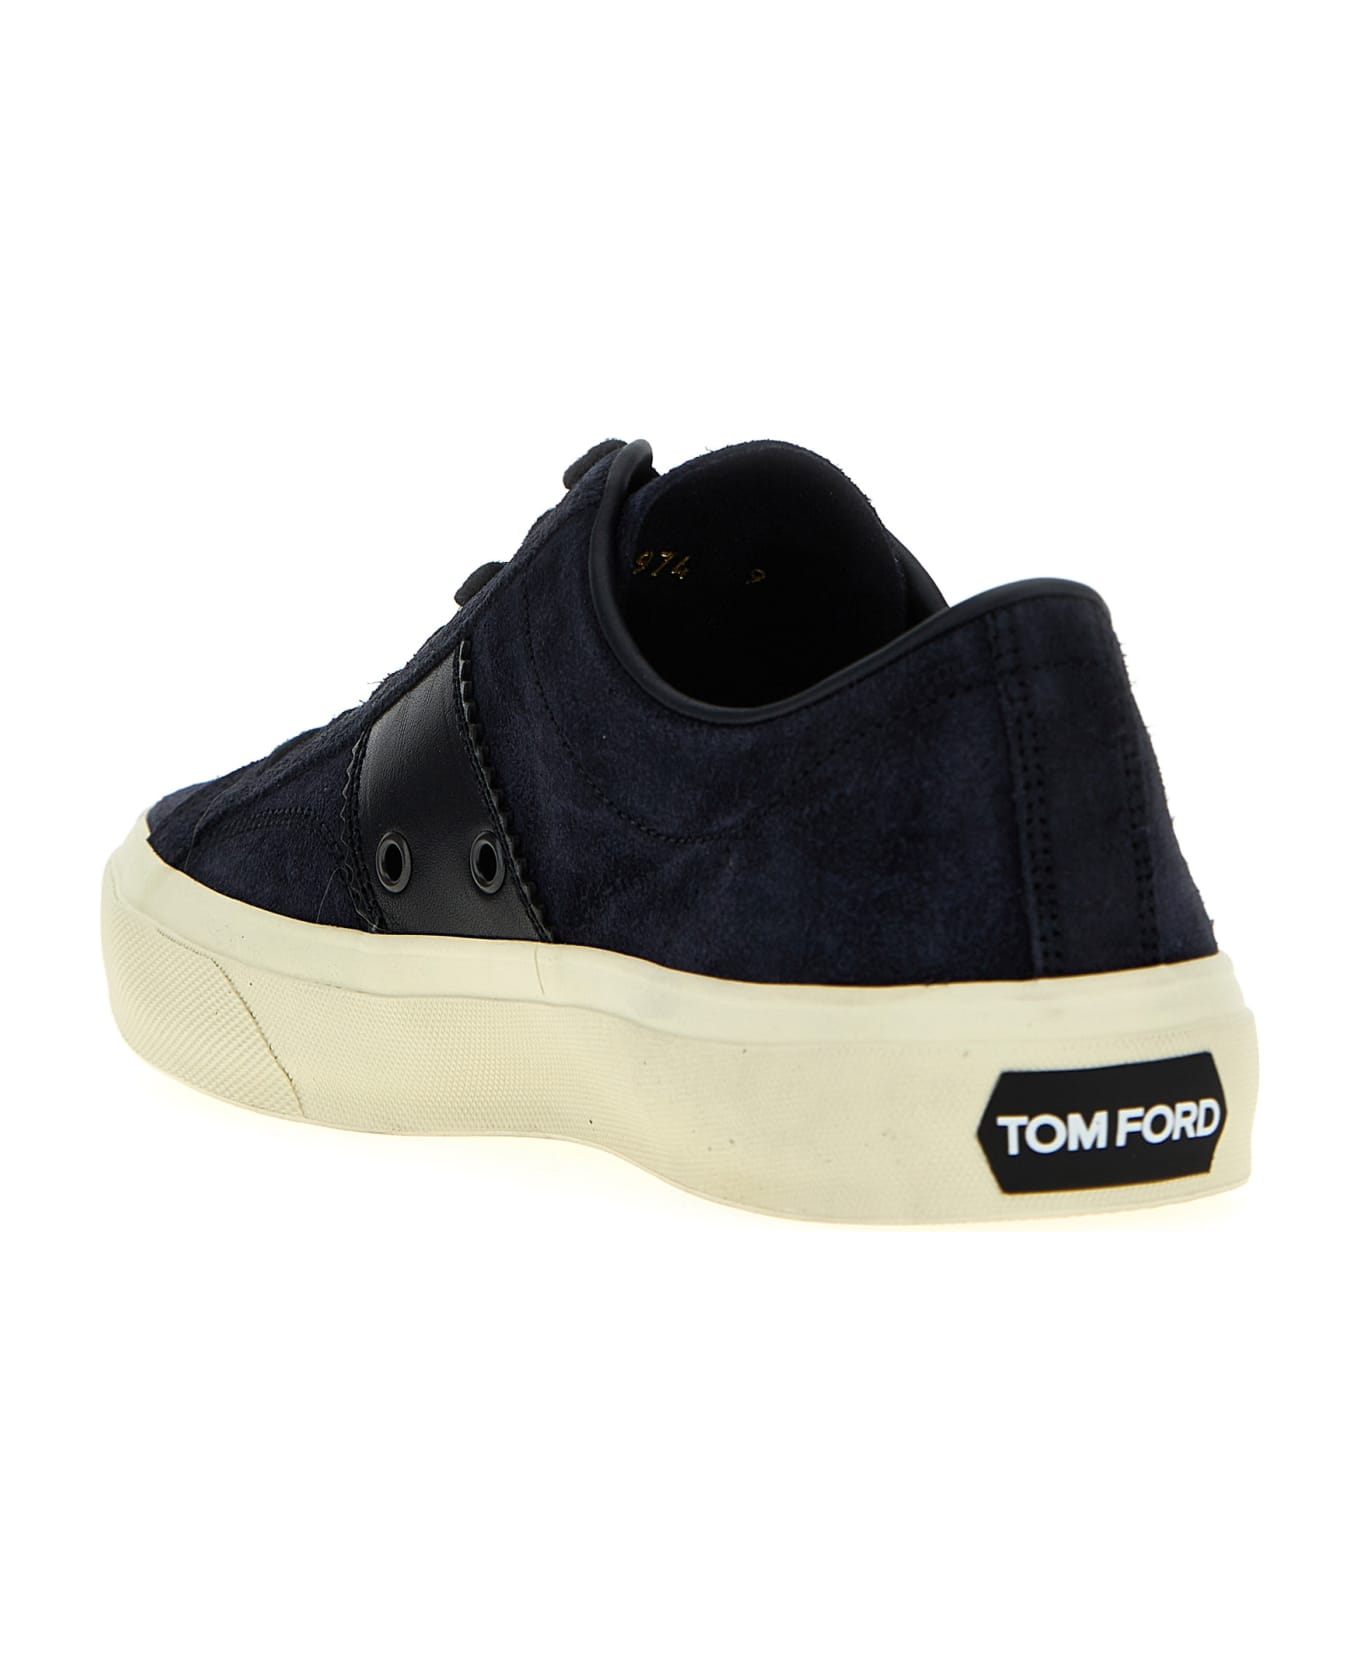 Tom Ford 'cambridge' Sneakers - Blue スニーカー